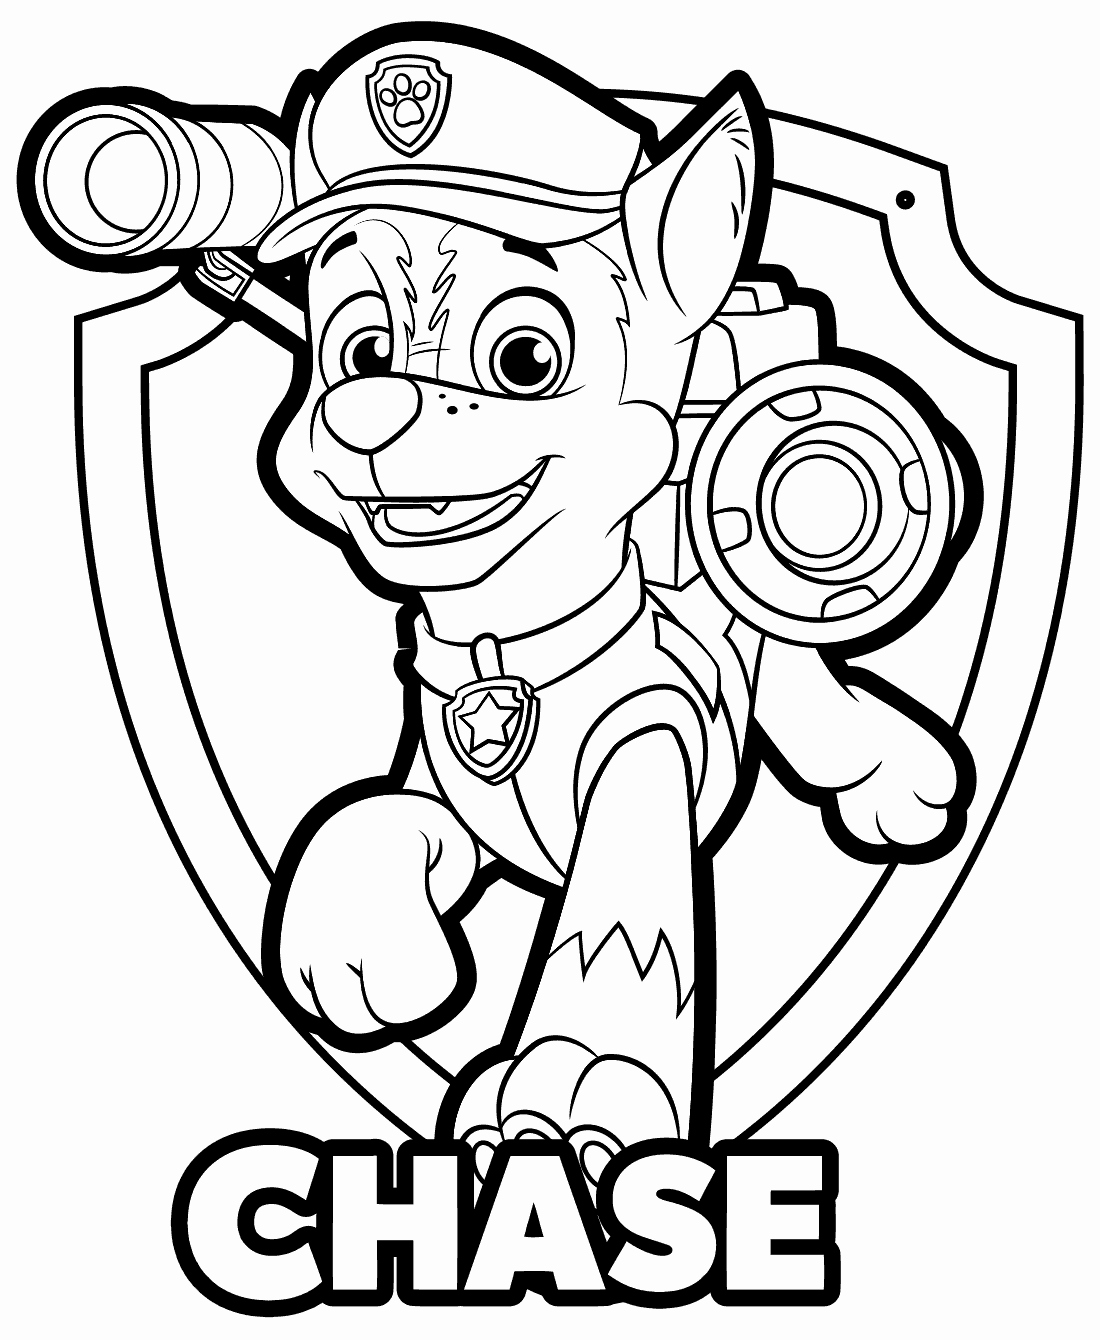 Chase Paw Patrol Coloring Pages at GetColoringscom Free